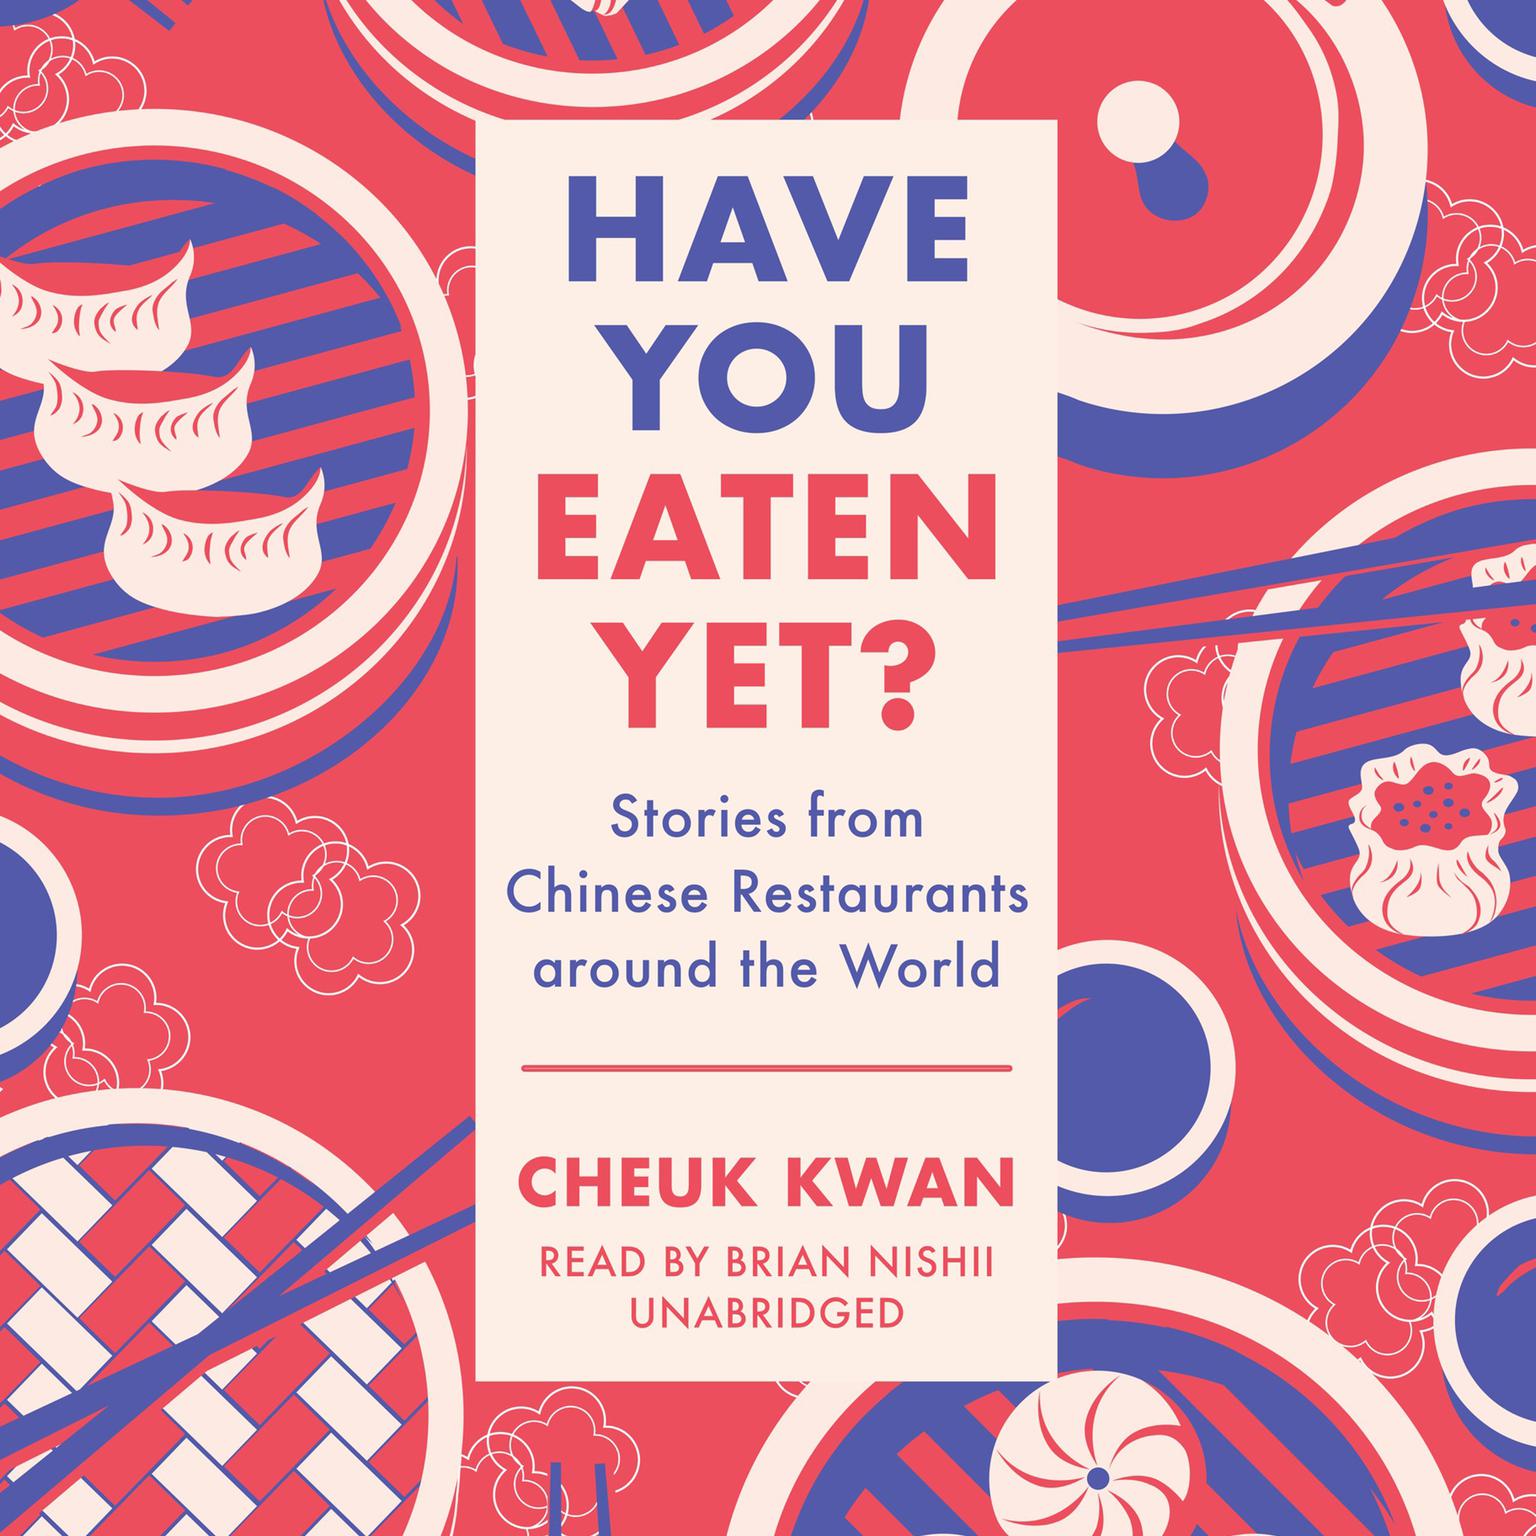 Have You Eaten Yet?: Stories from Chinese Restaurants around the World Audiobook, by Cheuk Kwan